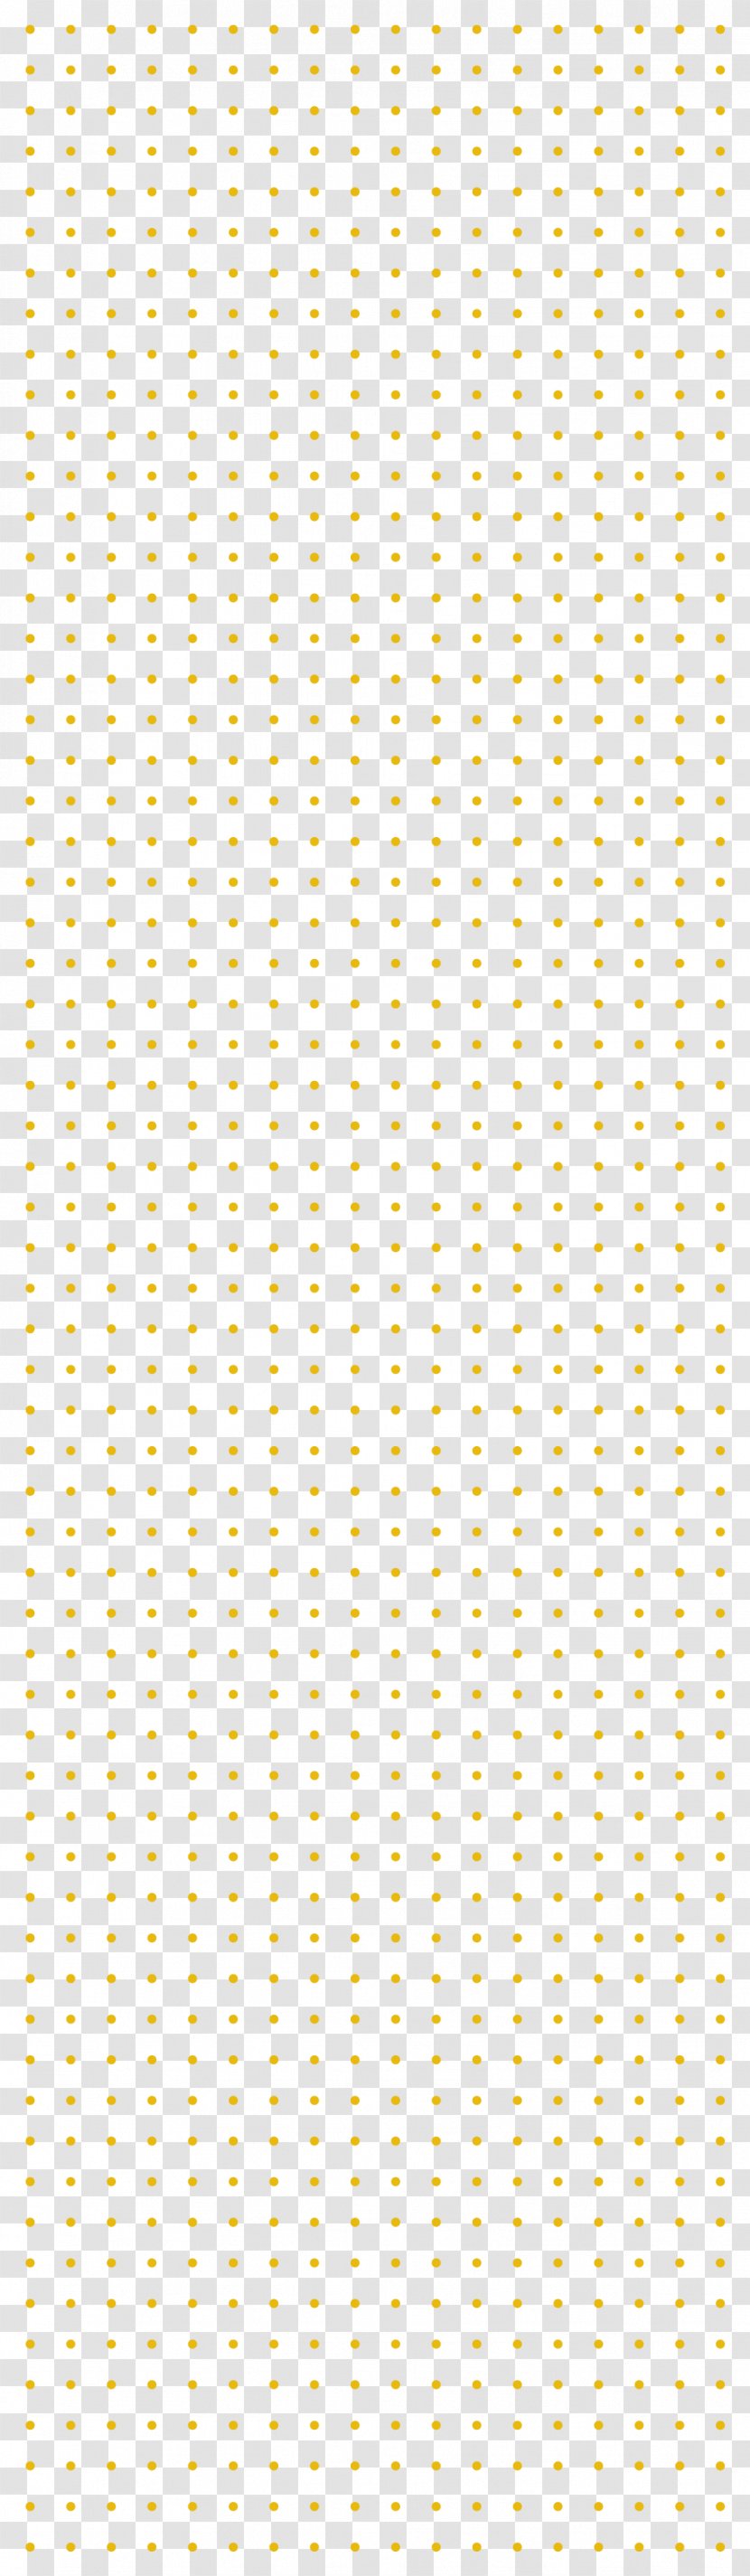 Area Rectangle Pattern - GOLD DOTS Transparent PNG